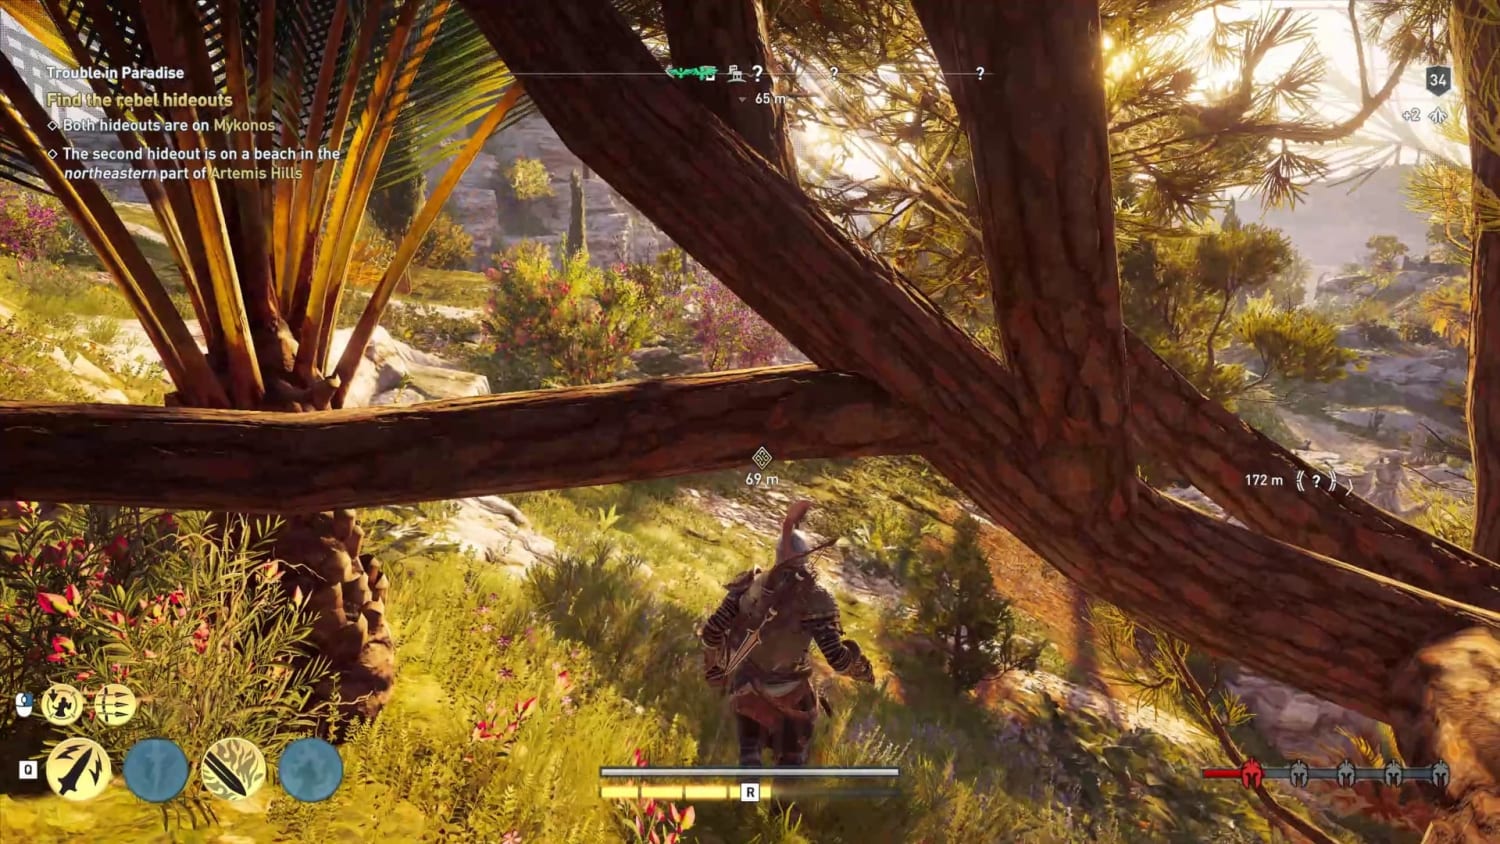 [AC Odyssey] This horse has achieved CHIM